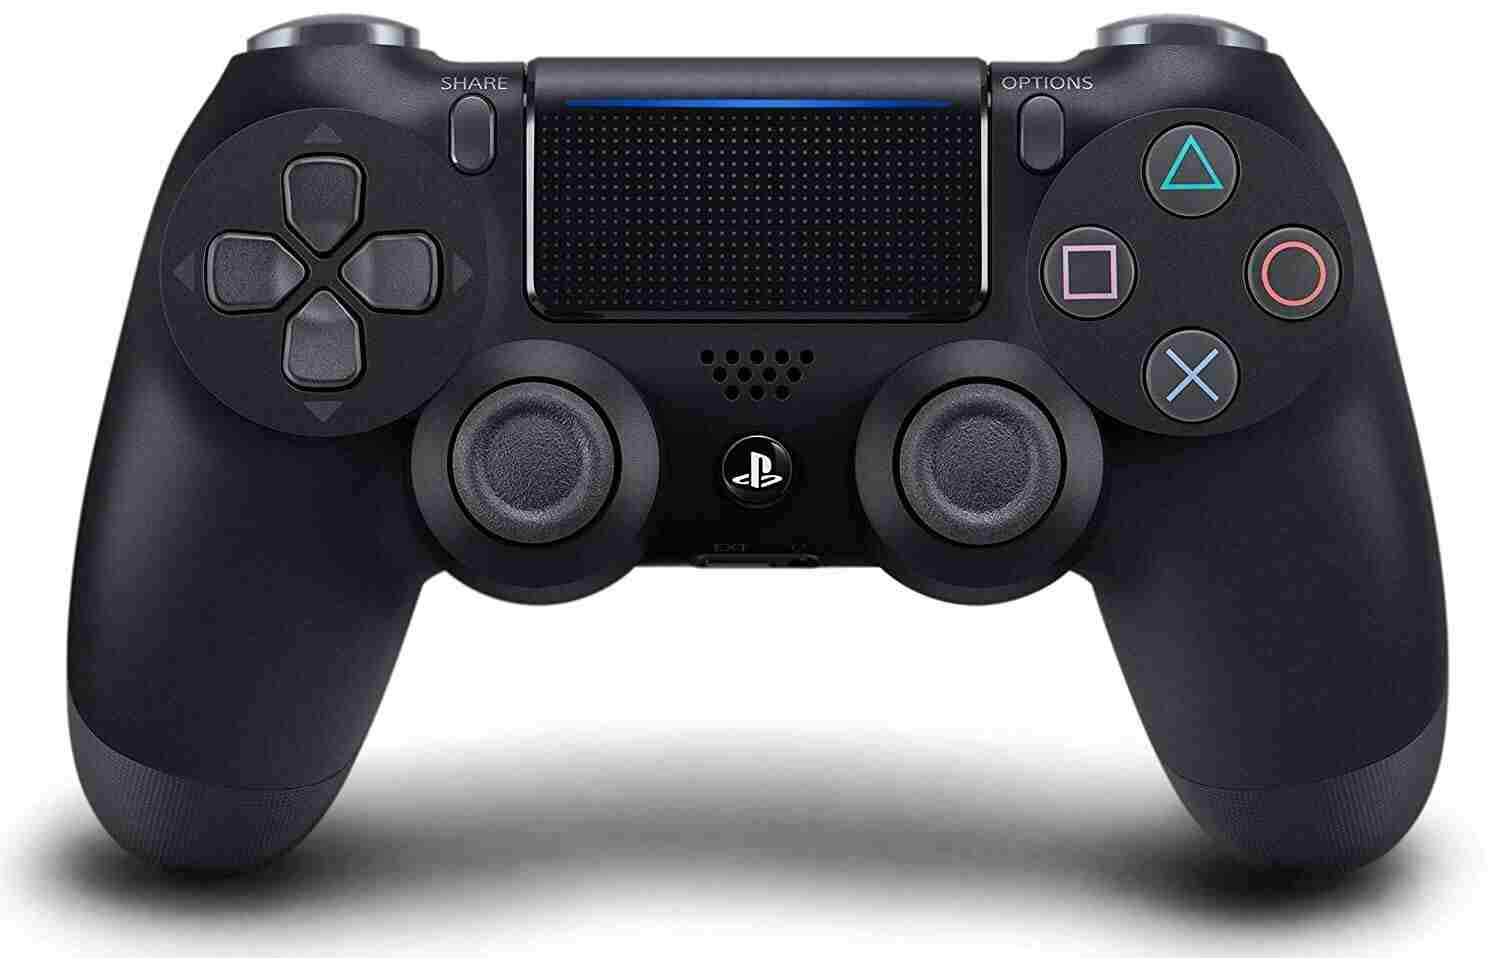 How to charge PS4 controller